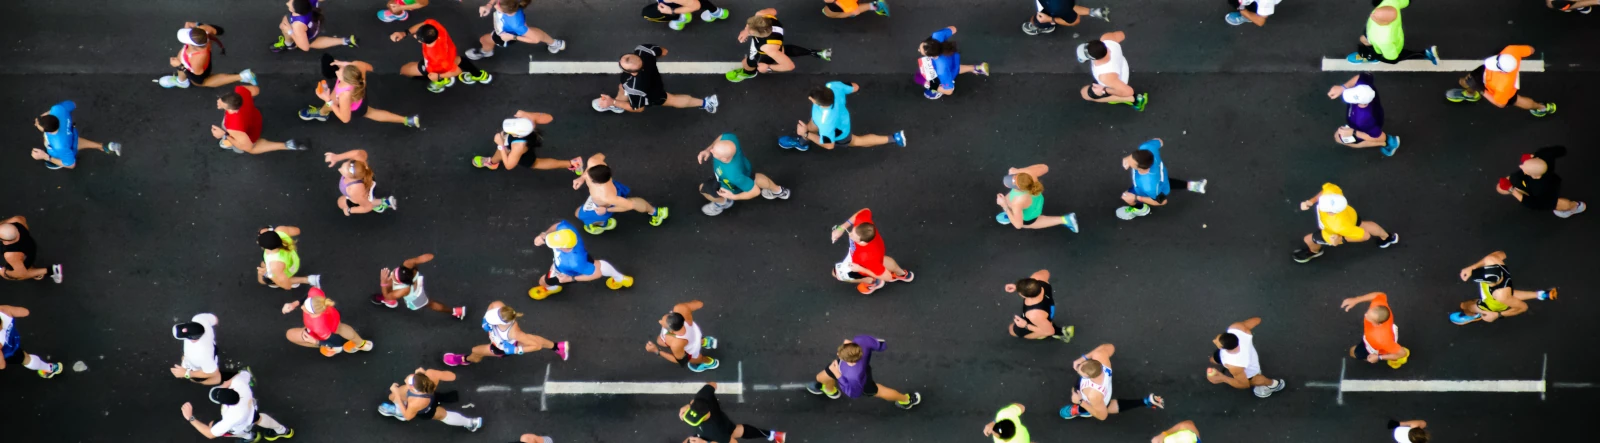 An aerial view of several runners on the road